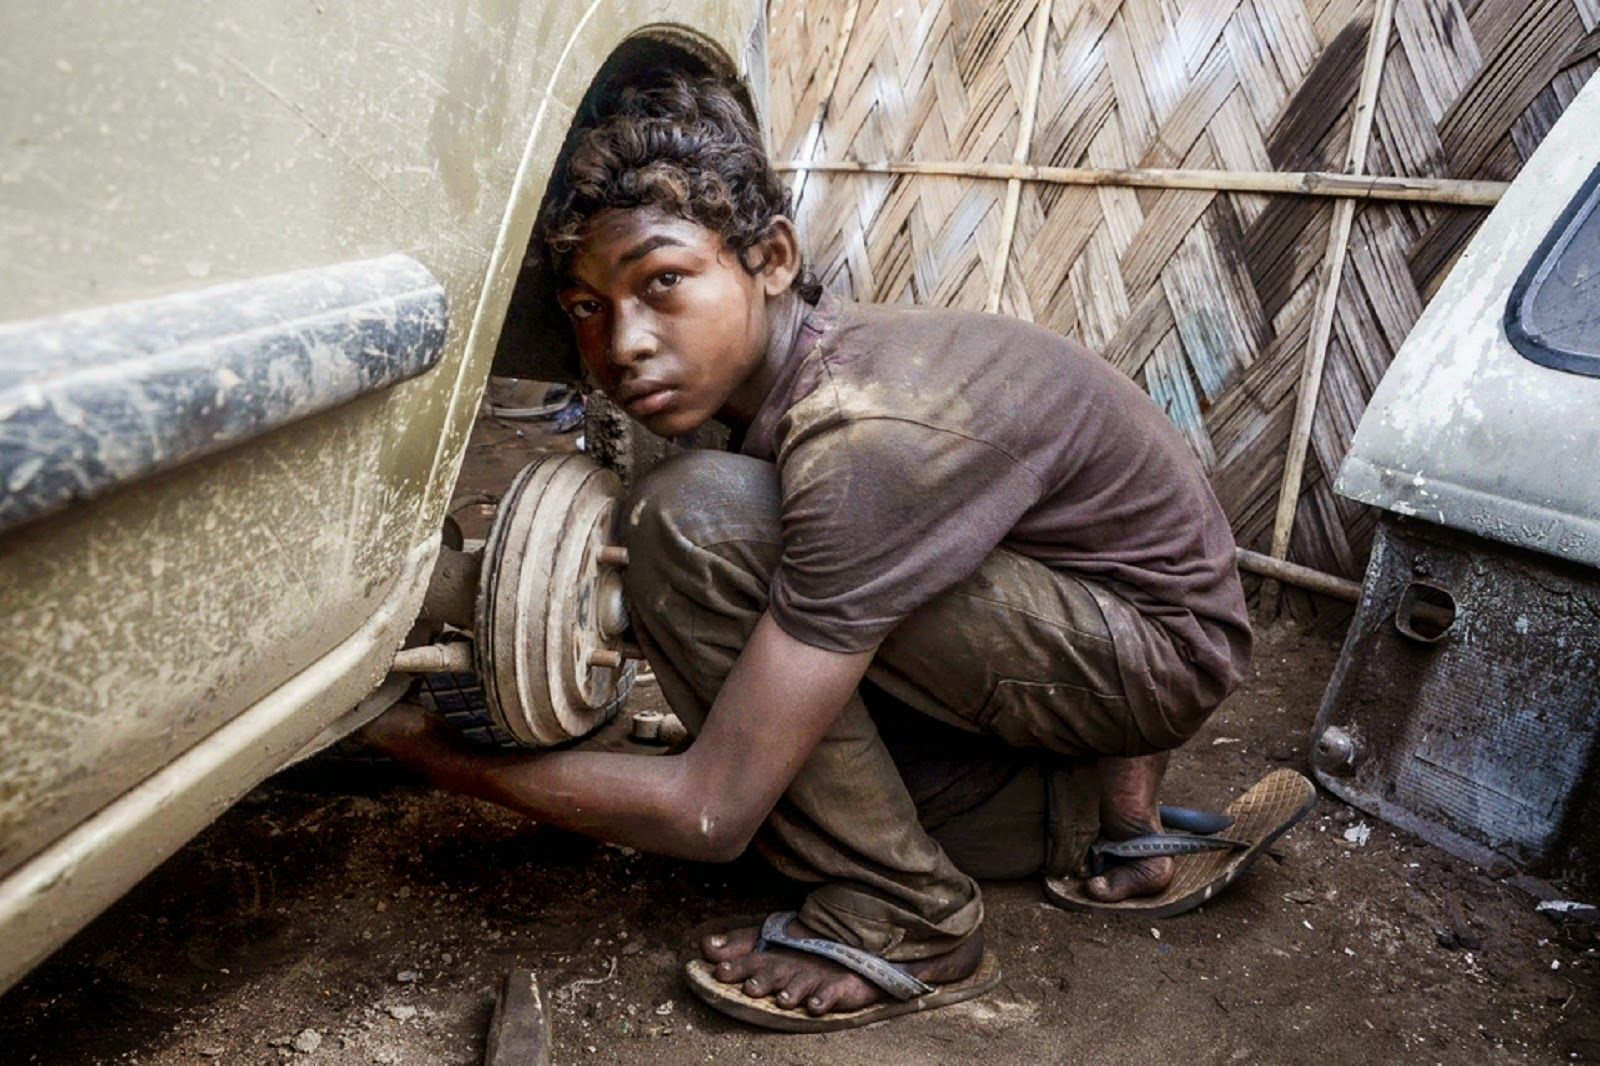 Should Child Labor Be Banned